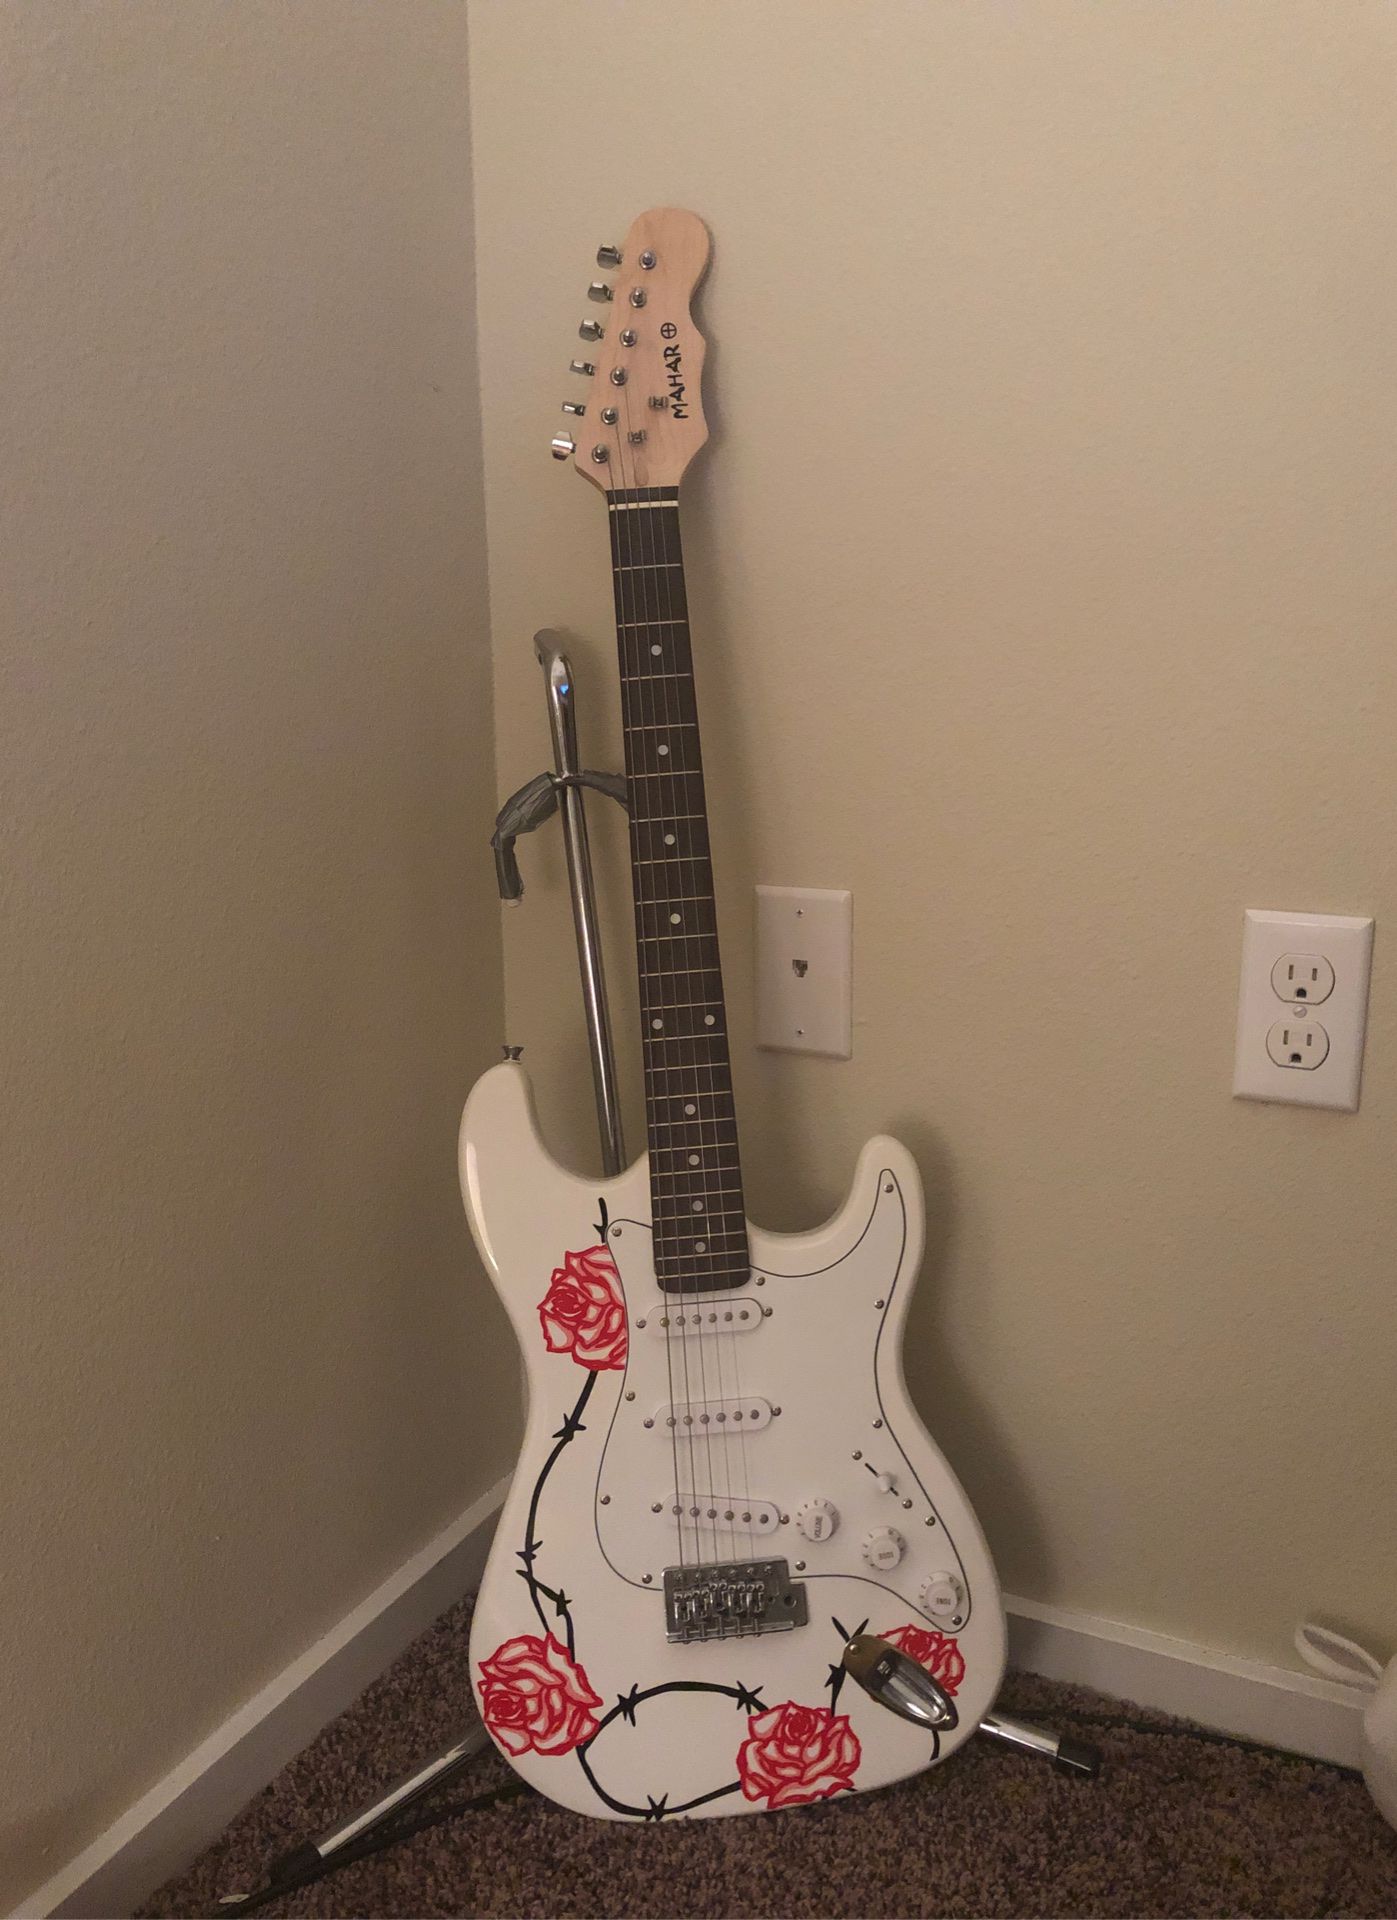 Selling a guitar has one string fully functional